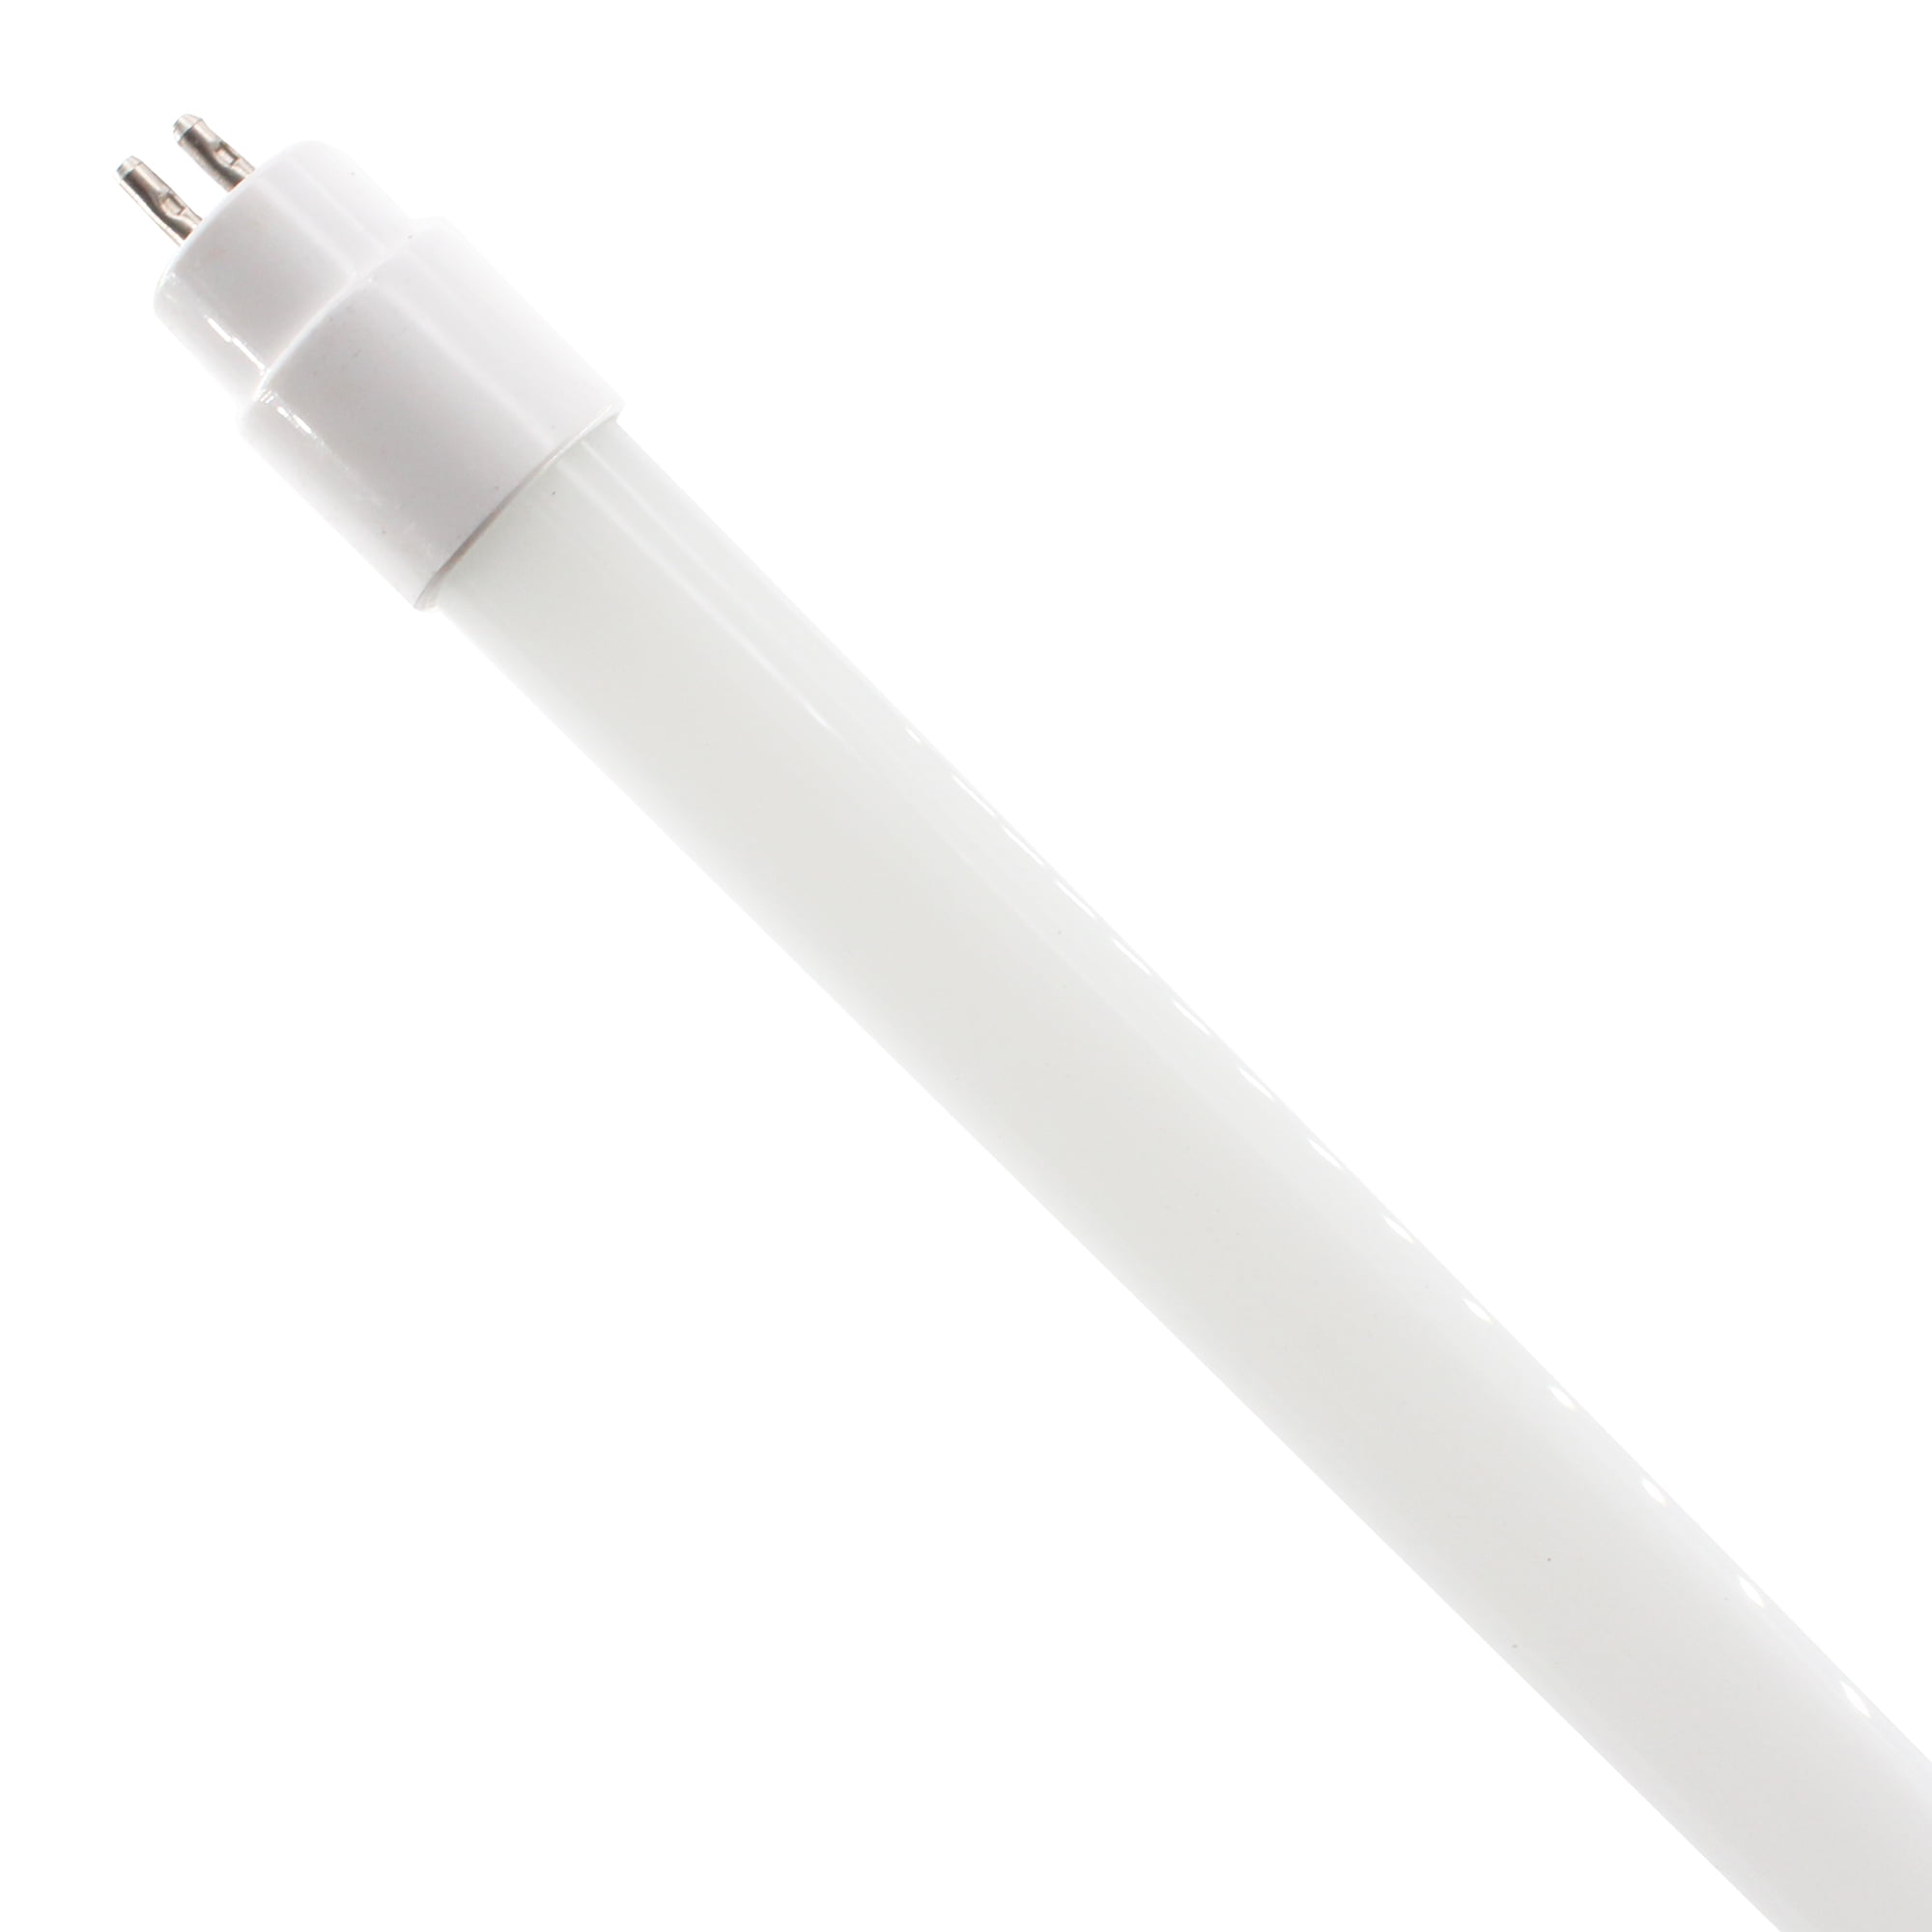 1200mm Details about   36w T8 4ft Colour 830 Warm White Fluorescent Tube GE Brand 203538 